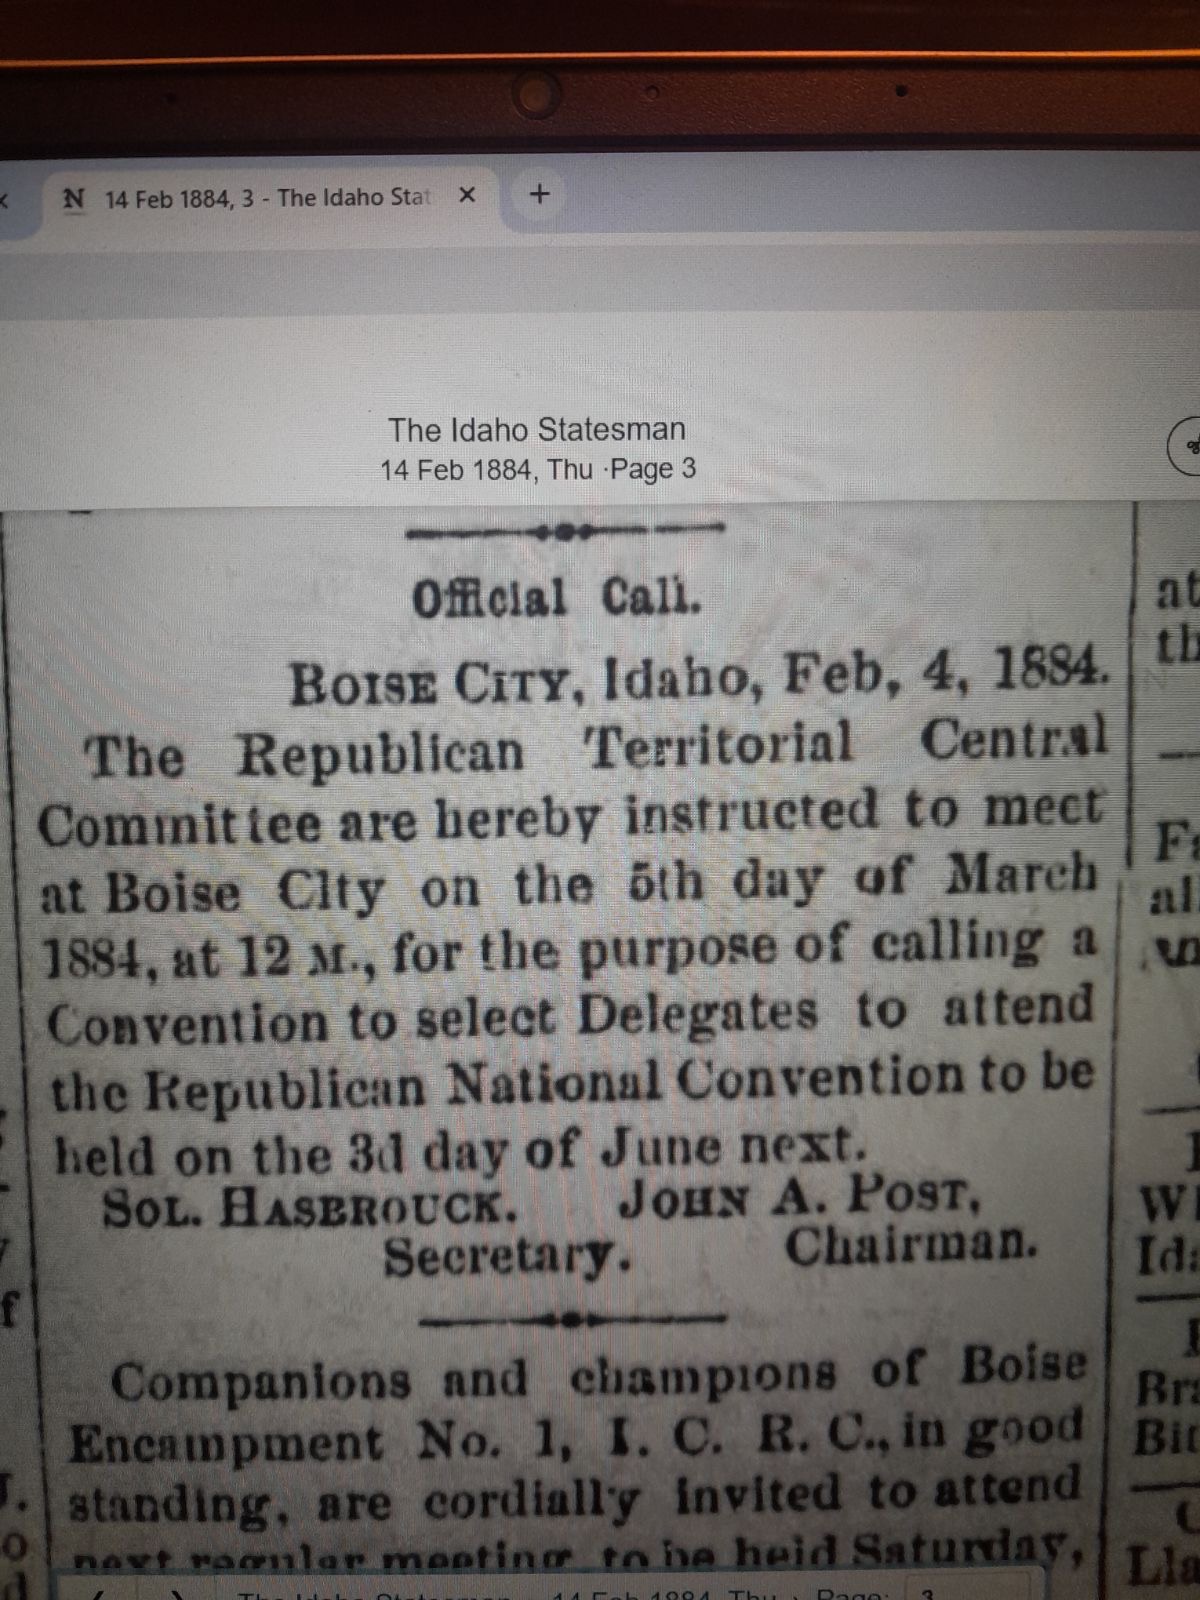 The Republican Territorial Central Committee Scheduled Meeting to Select Delelgates to National Convention